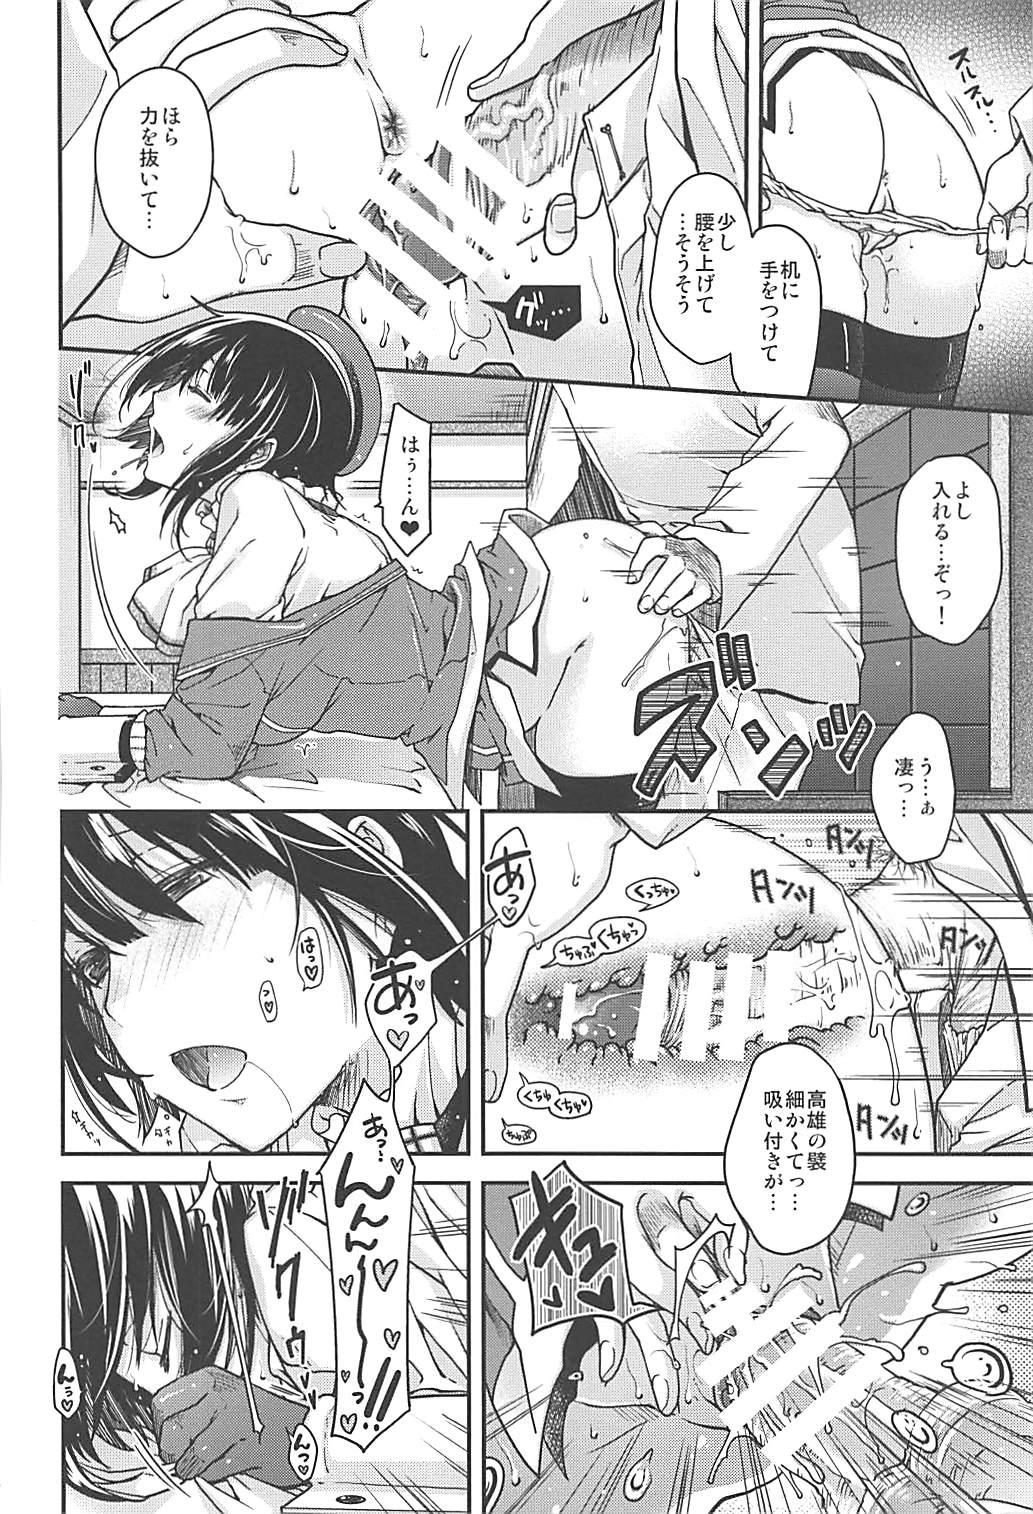 Insertion immoral - Kantai collection Ftv Girls - Page 5